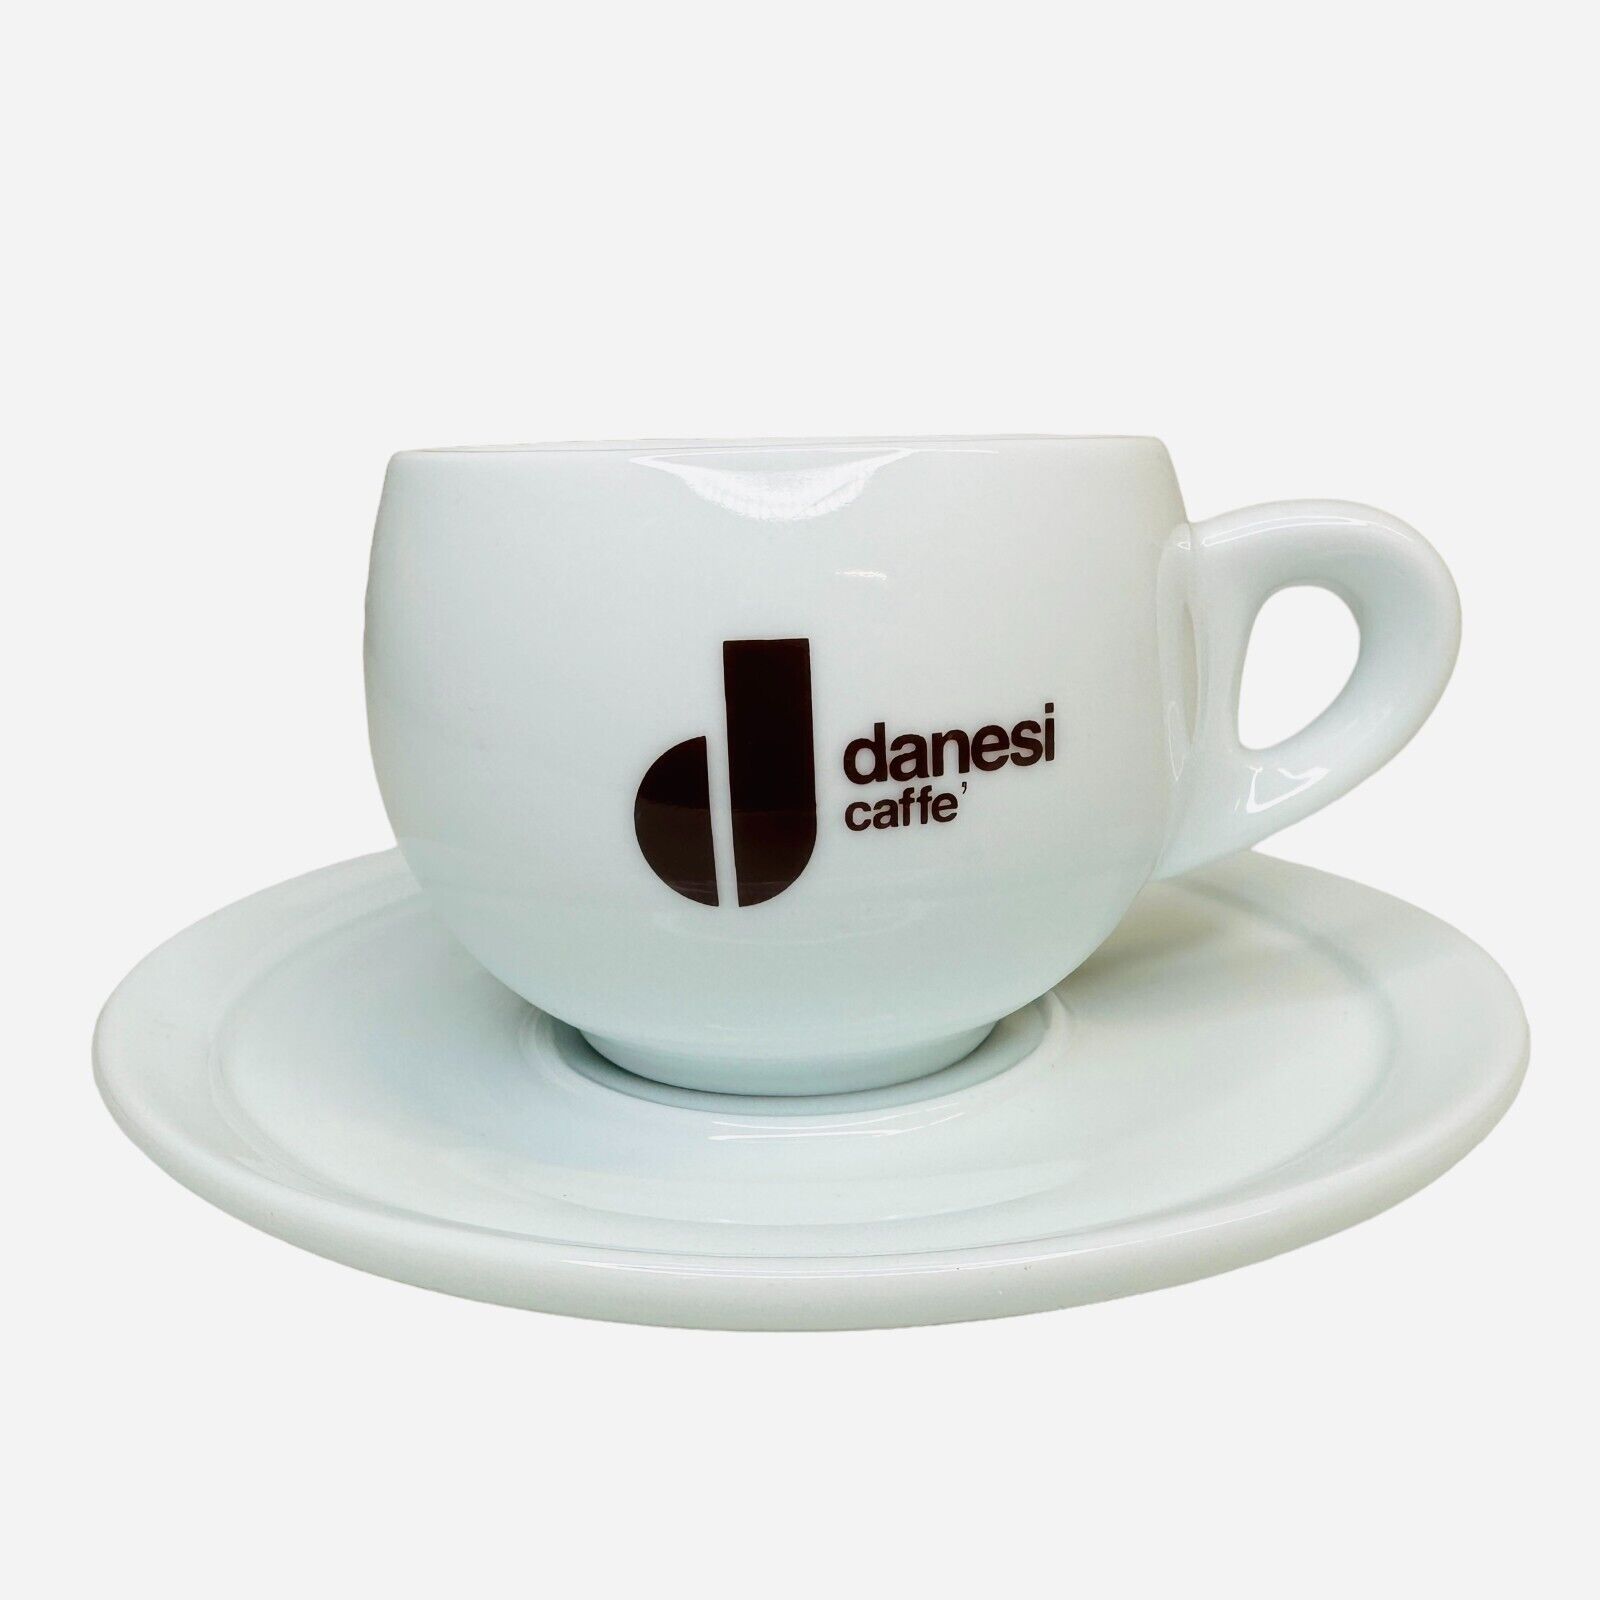 Danesi Cafe XL White Porcelain Cappuccino/Latte Coffee Cup & Saucer Plate